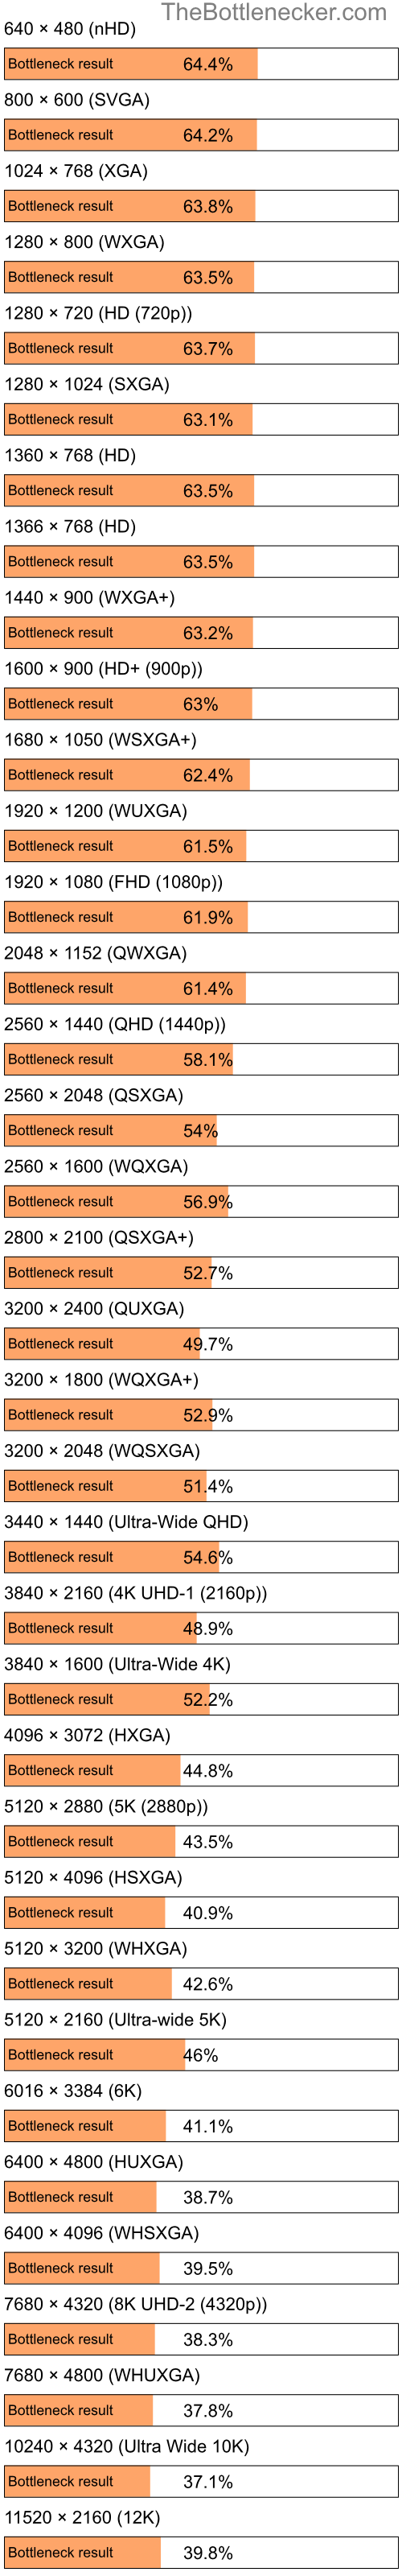 Bottleneck results by resolution for Intel Core i3-10100F and NVIDIA GeForce RTX 3080 in Processor Intense Tasks